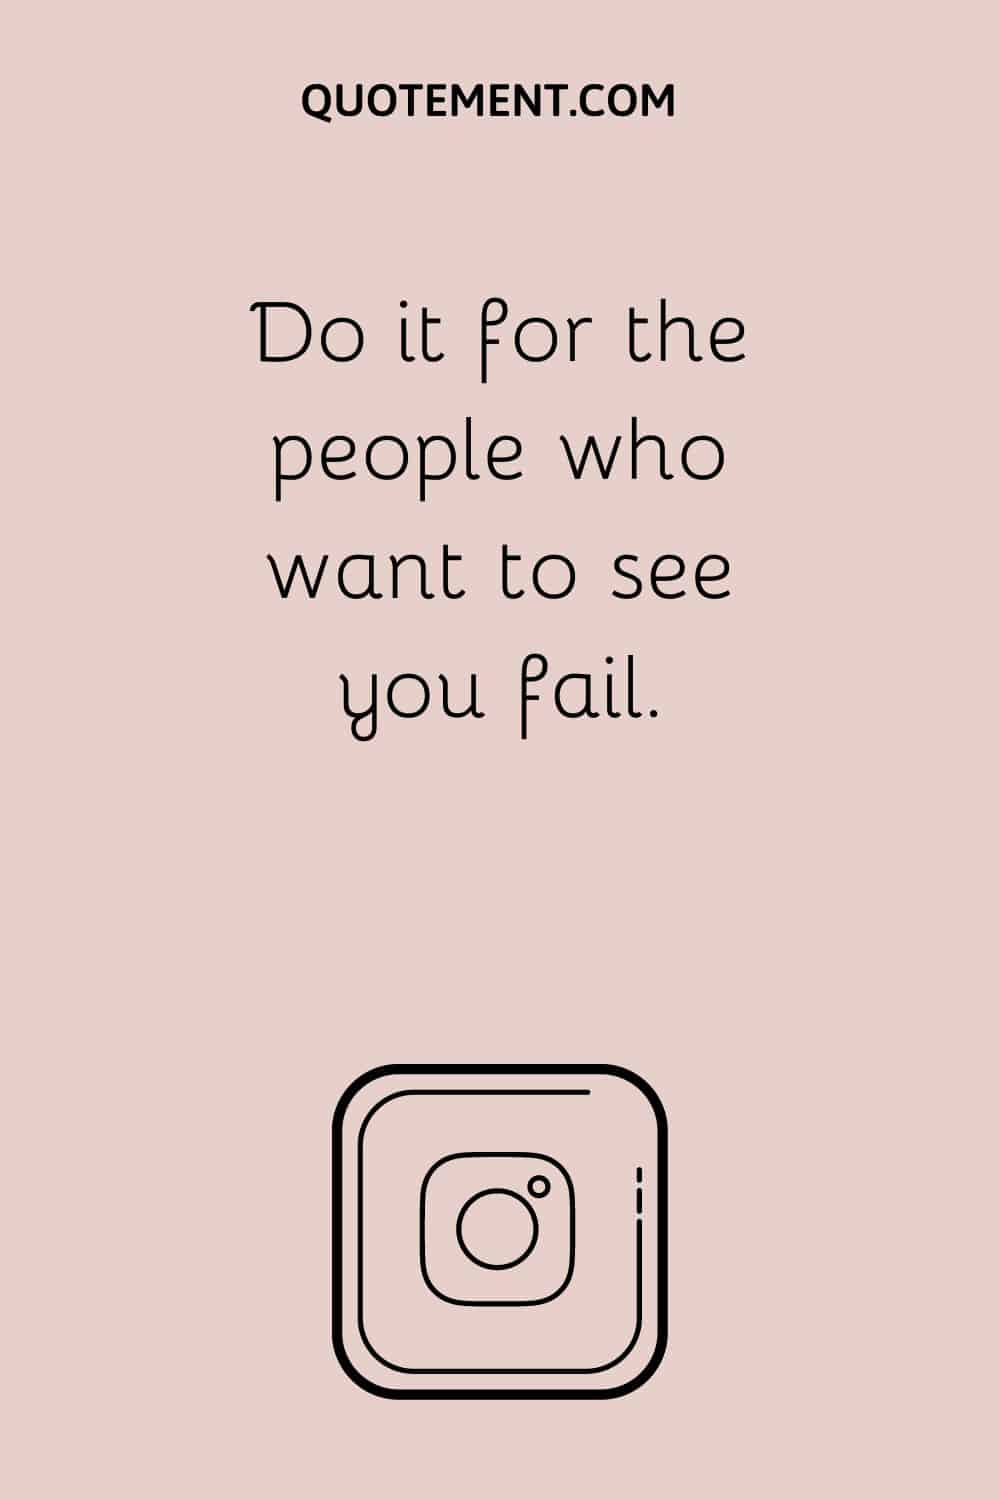 Do it for the people who want to see you fail.